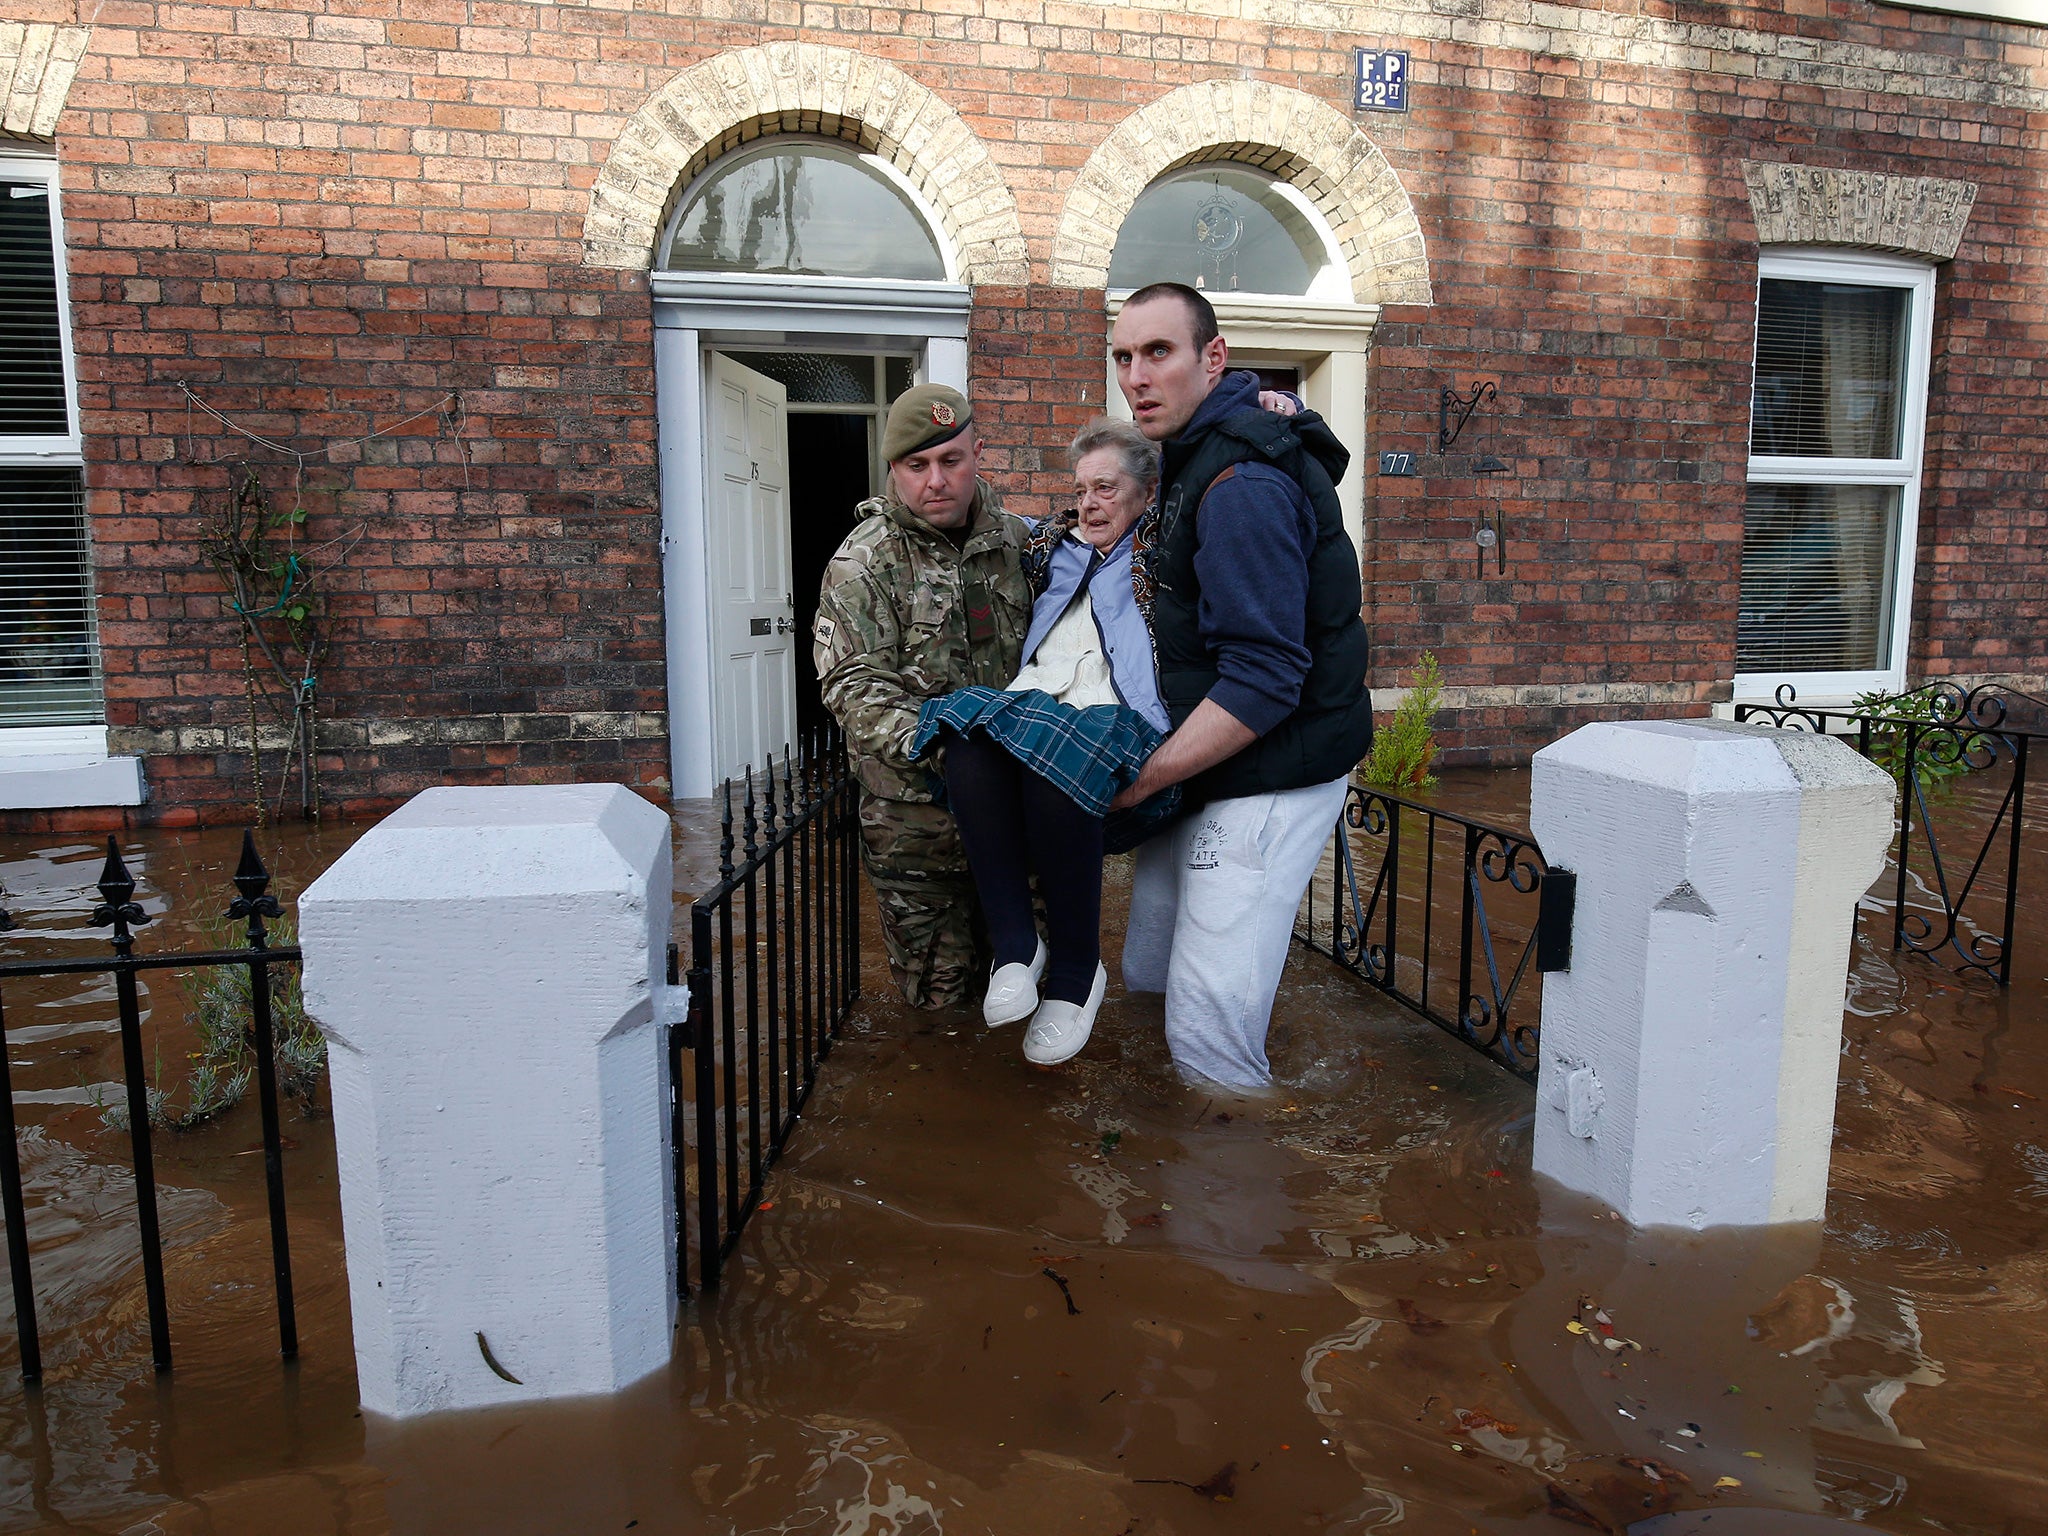 Margaret McCraken, who was helped from her home in Broad Street in Carlisle by members of the armed forces